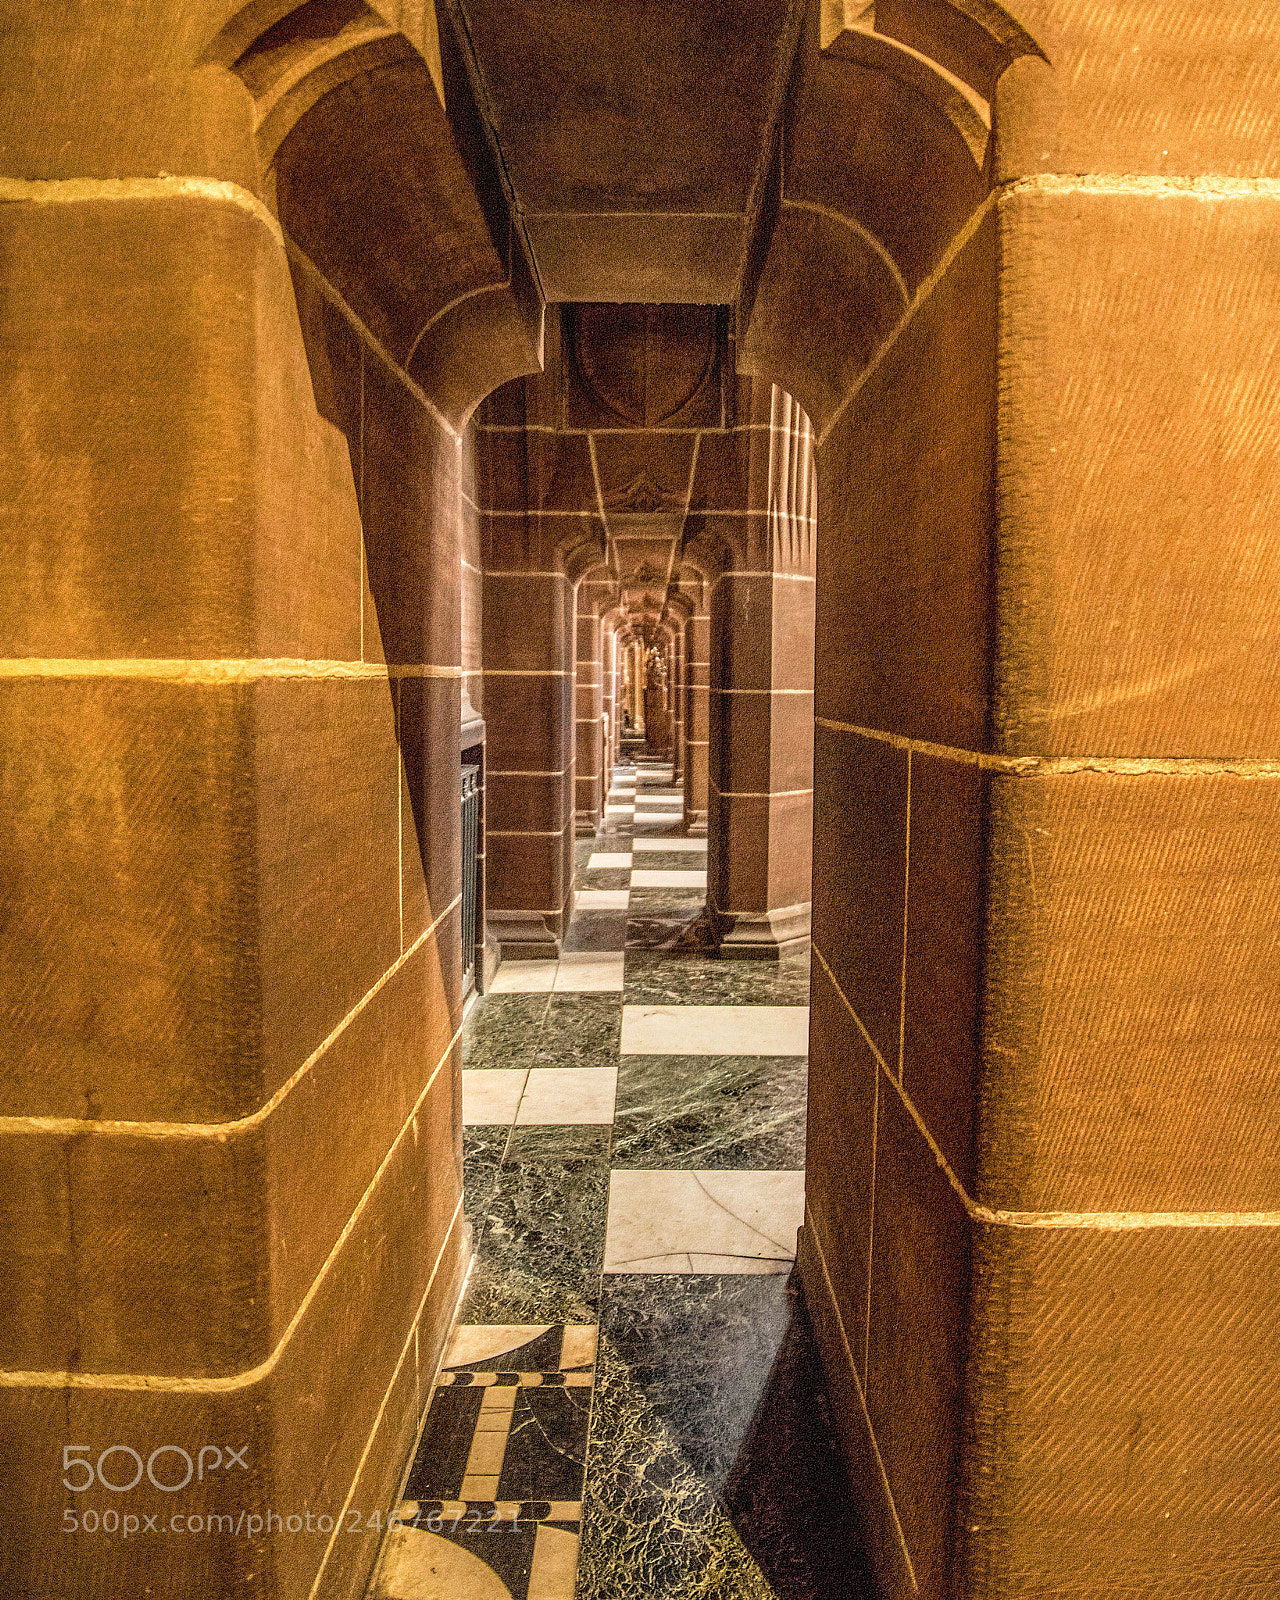 Canon EOS 6D Mark II sample photo. Liverpool cathedral, the largest photography